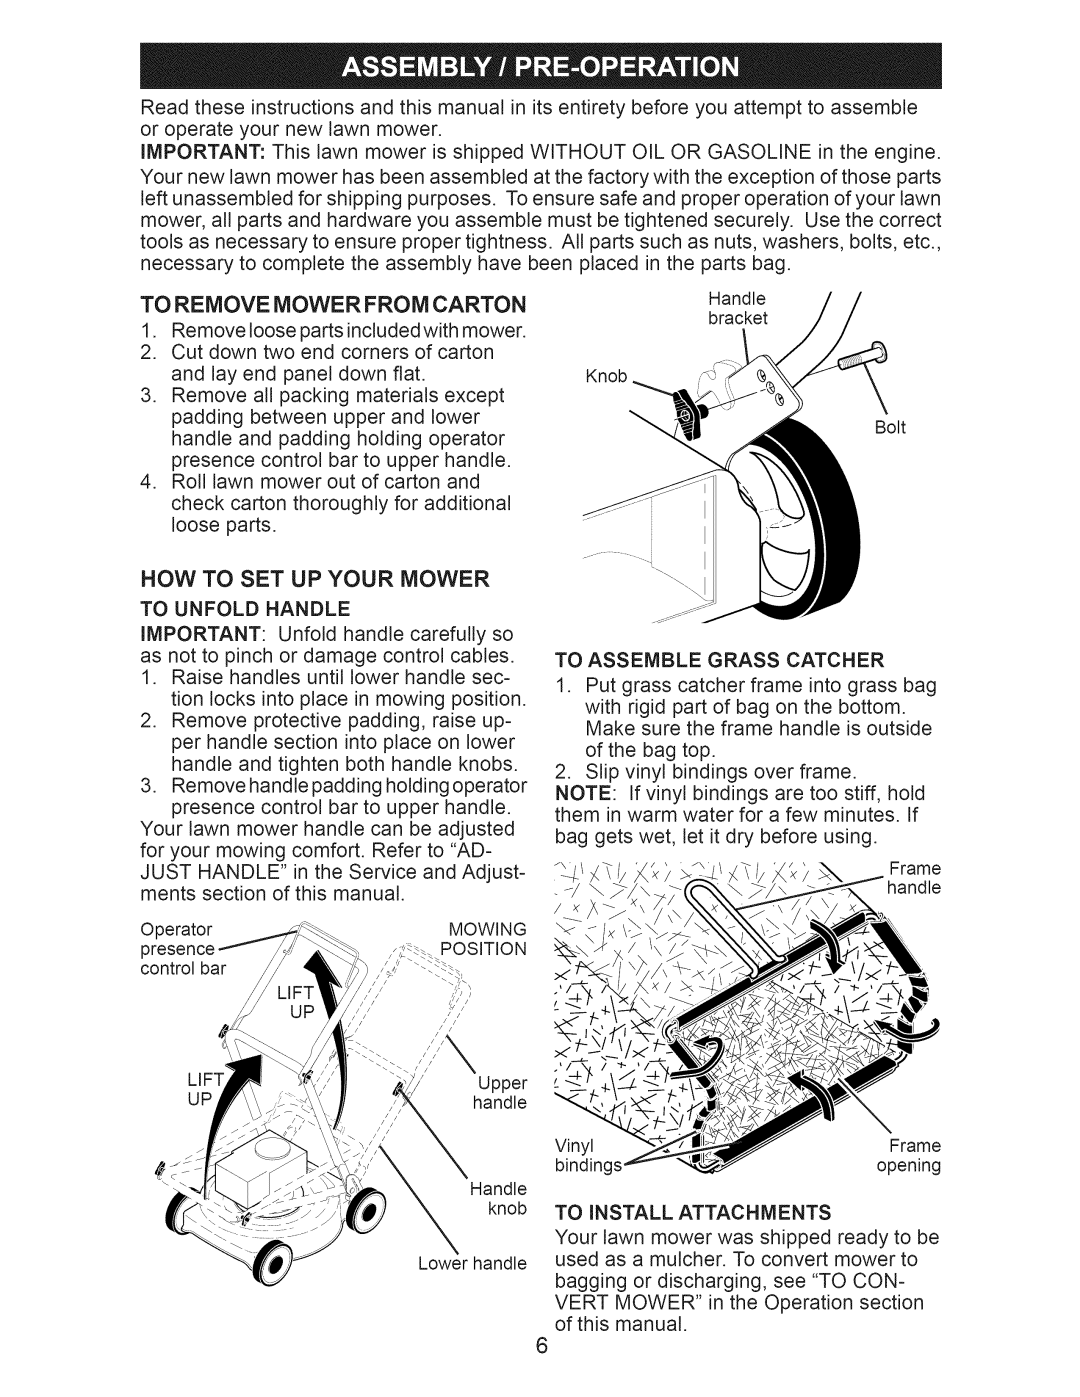 Craftsman 917.376407 owner manual To Remove Mower From Carton, Now To Set Up Your Mower 